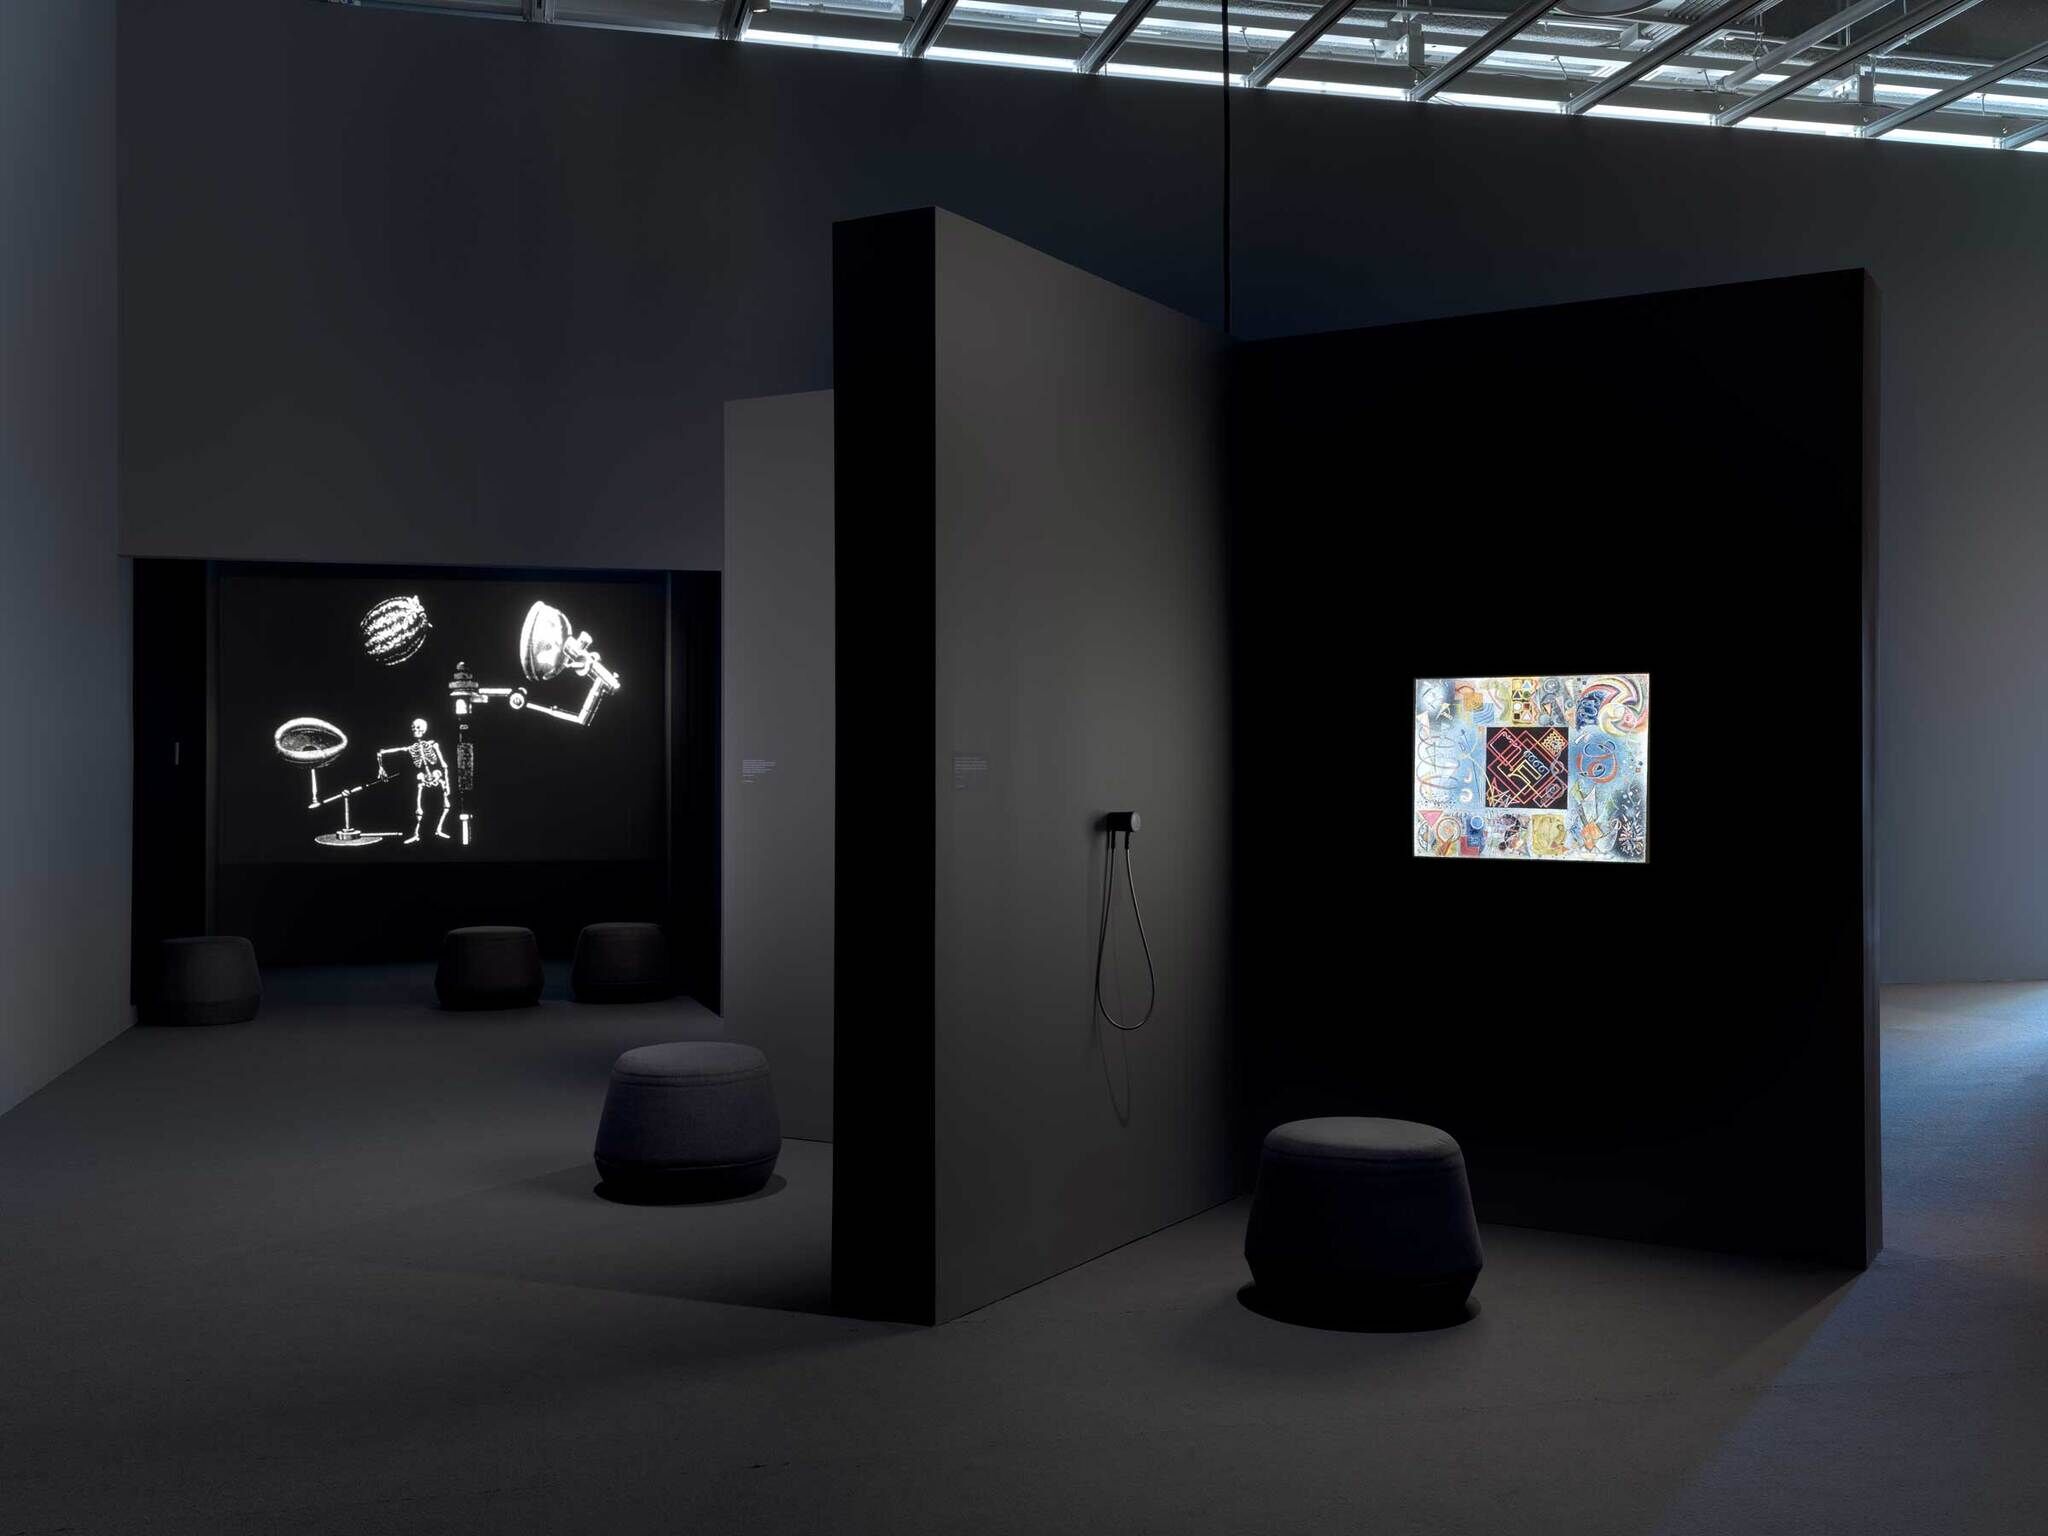 On the left, a dark theater with a skeleton playing on the screen, and on the right is a pinwheel-like structure with a lightbox illuminating a colorful painting and speaker on its left.